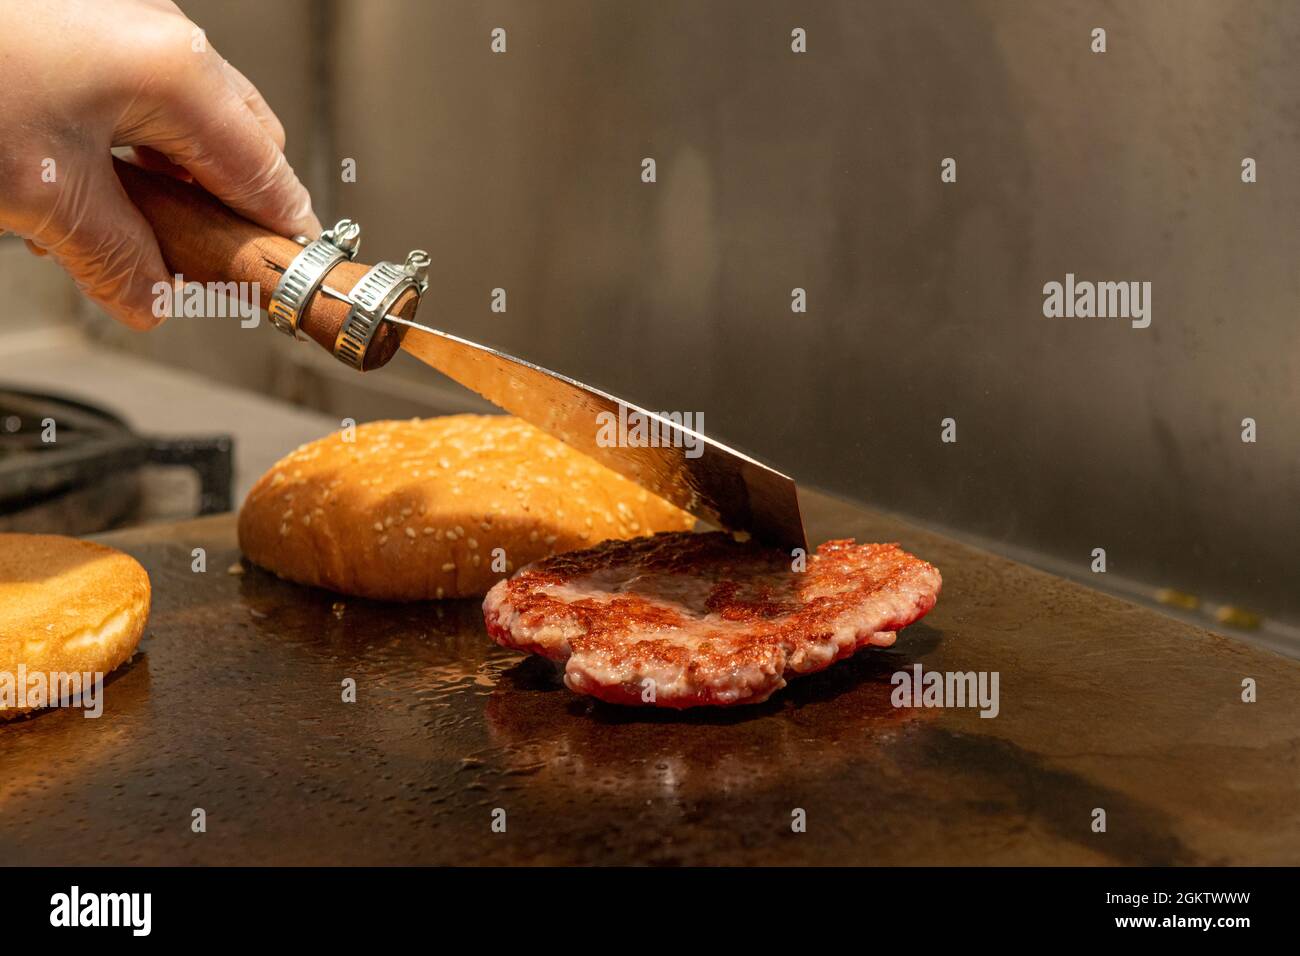 Chef's left hand handling a spatula to cook a grilled hamburger in a restaurant kitchen Stock Photo